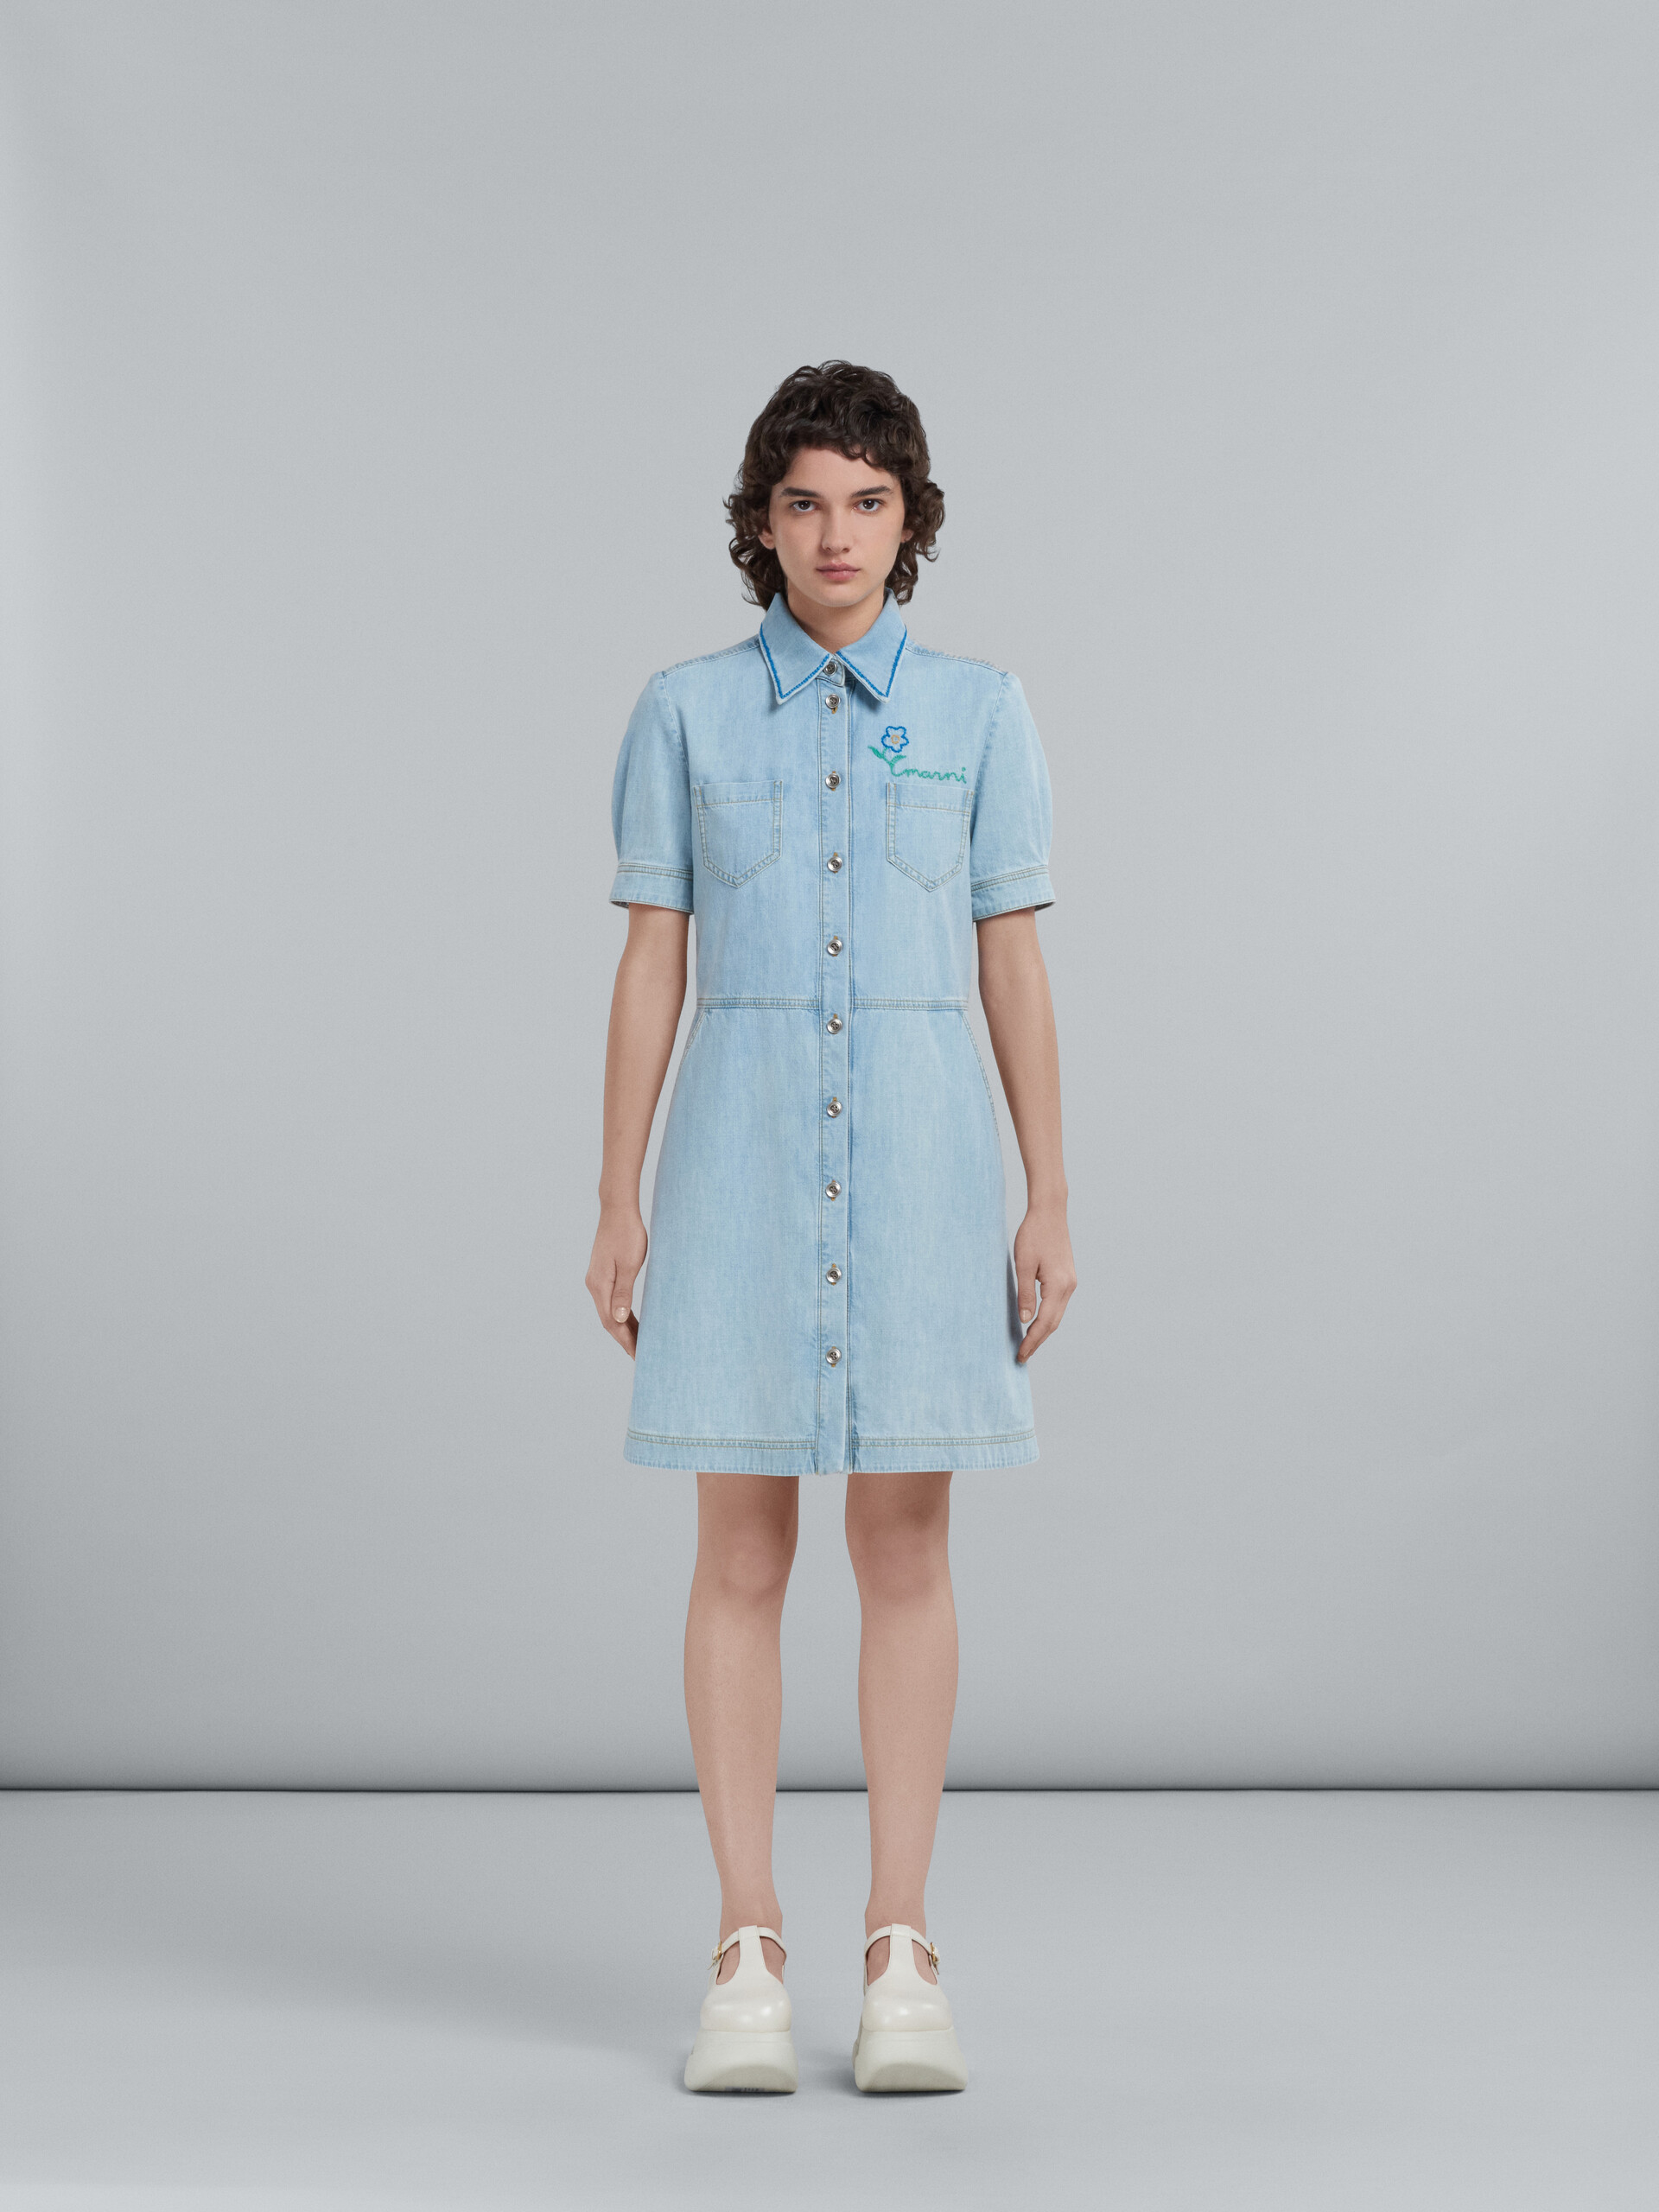 Light blue chambray dress with embroidery - Dresses - Image 2